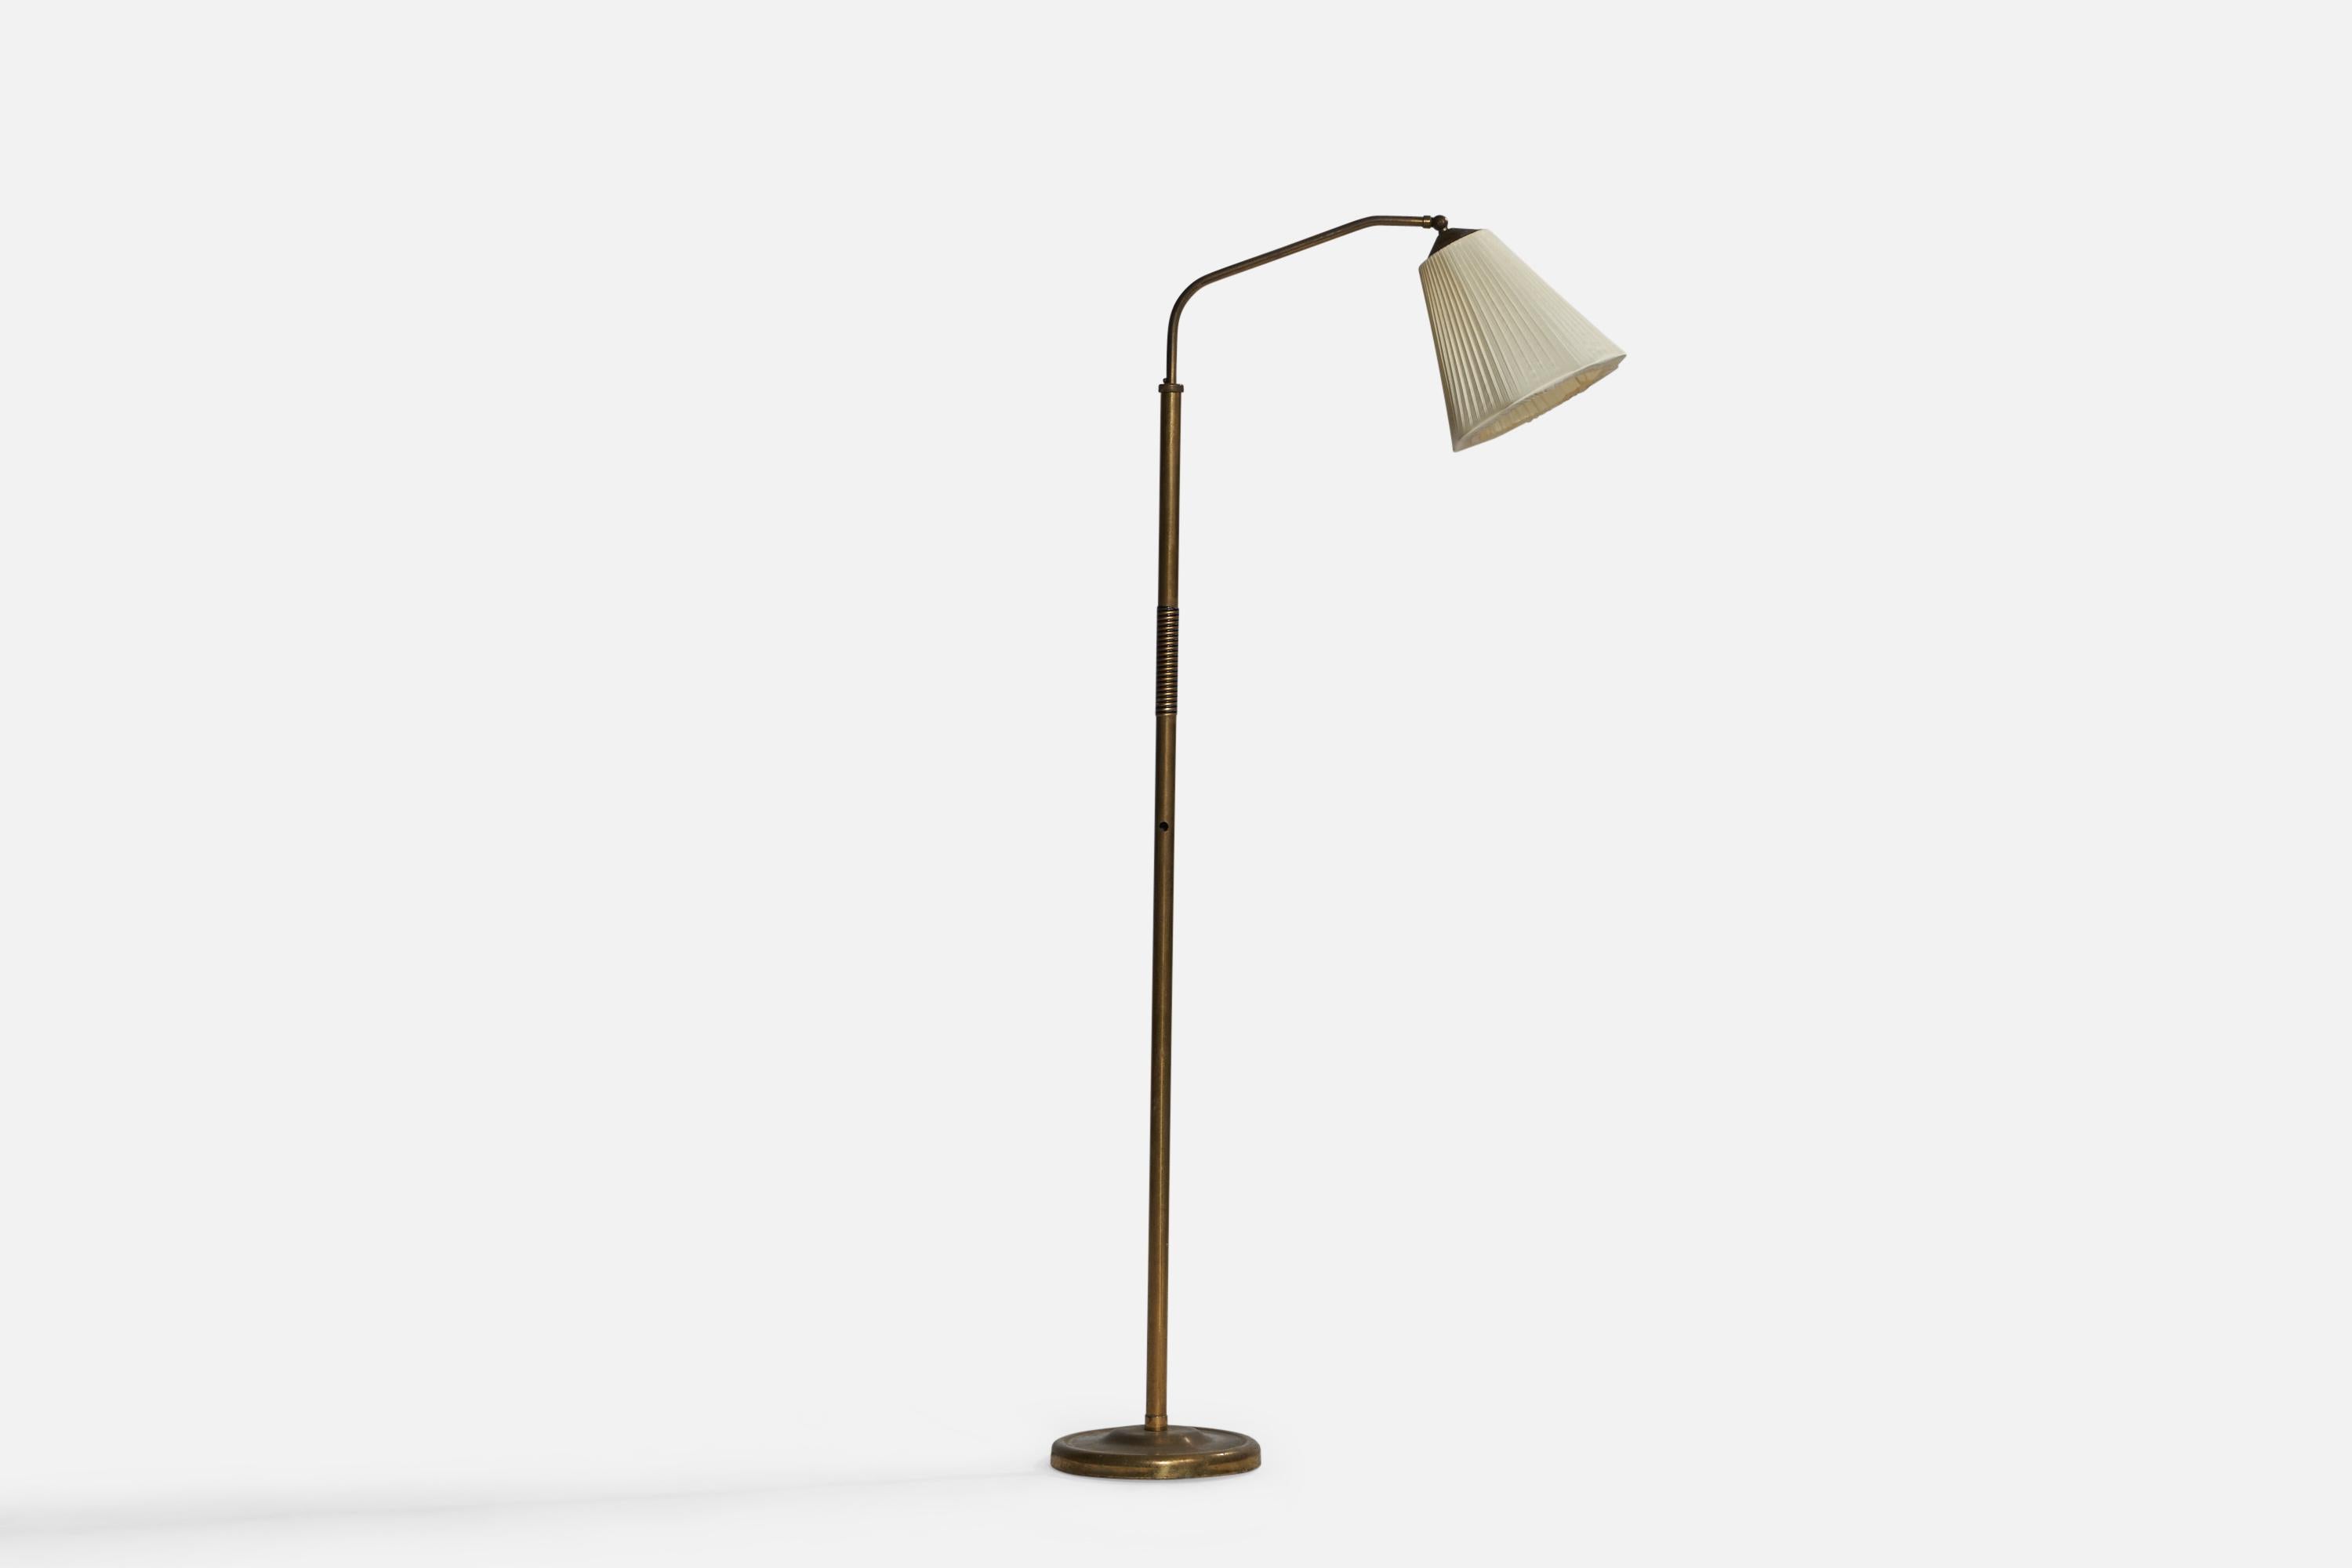 An adjustable brass and off-white fabric floor lamp designed and produced in Denmark, 1940s.

Overall Dimensions (inches): 57.25” H x 9.75” W x 25.25” D. Stated dimensions include shade.
Dimensions vary based on position of light.
Bulb